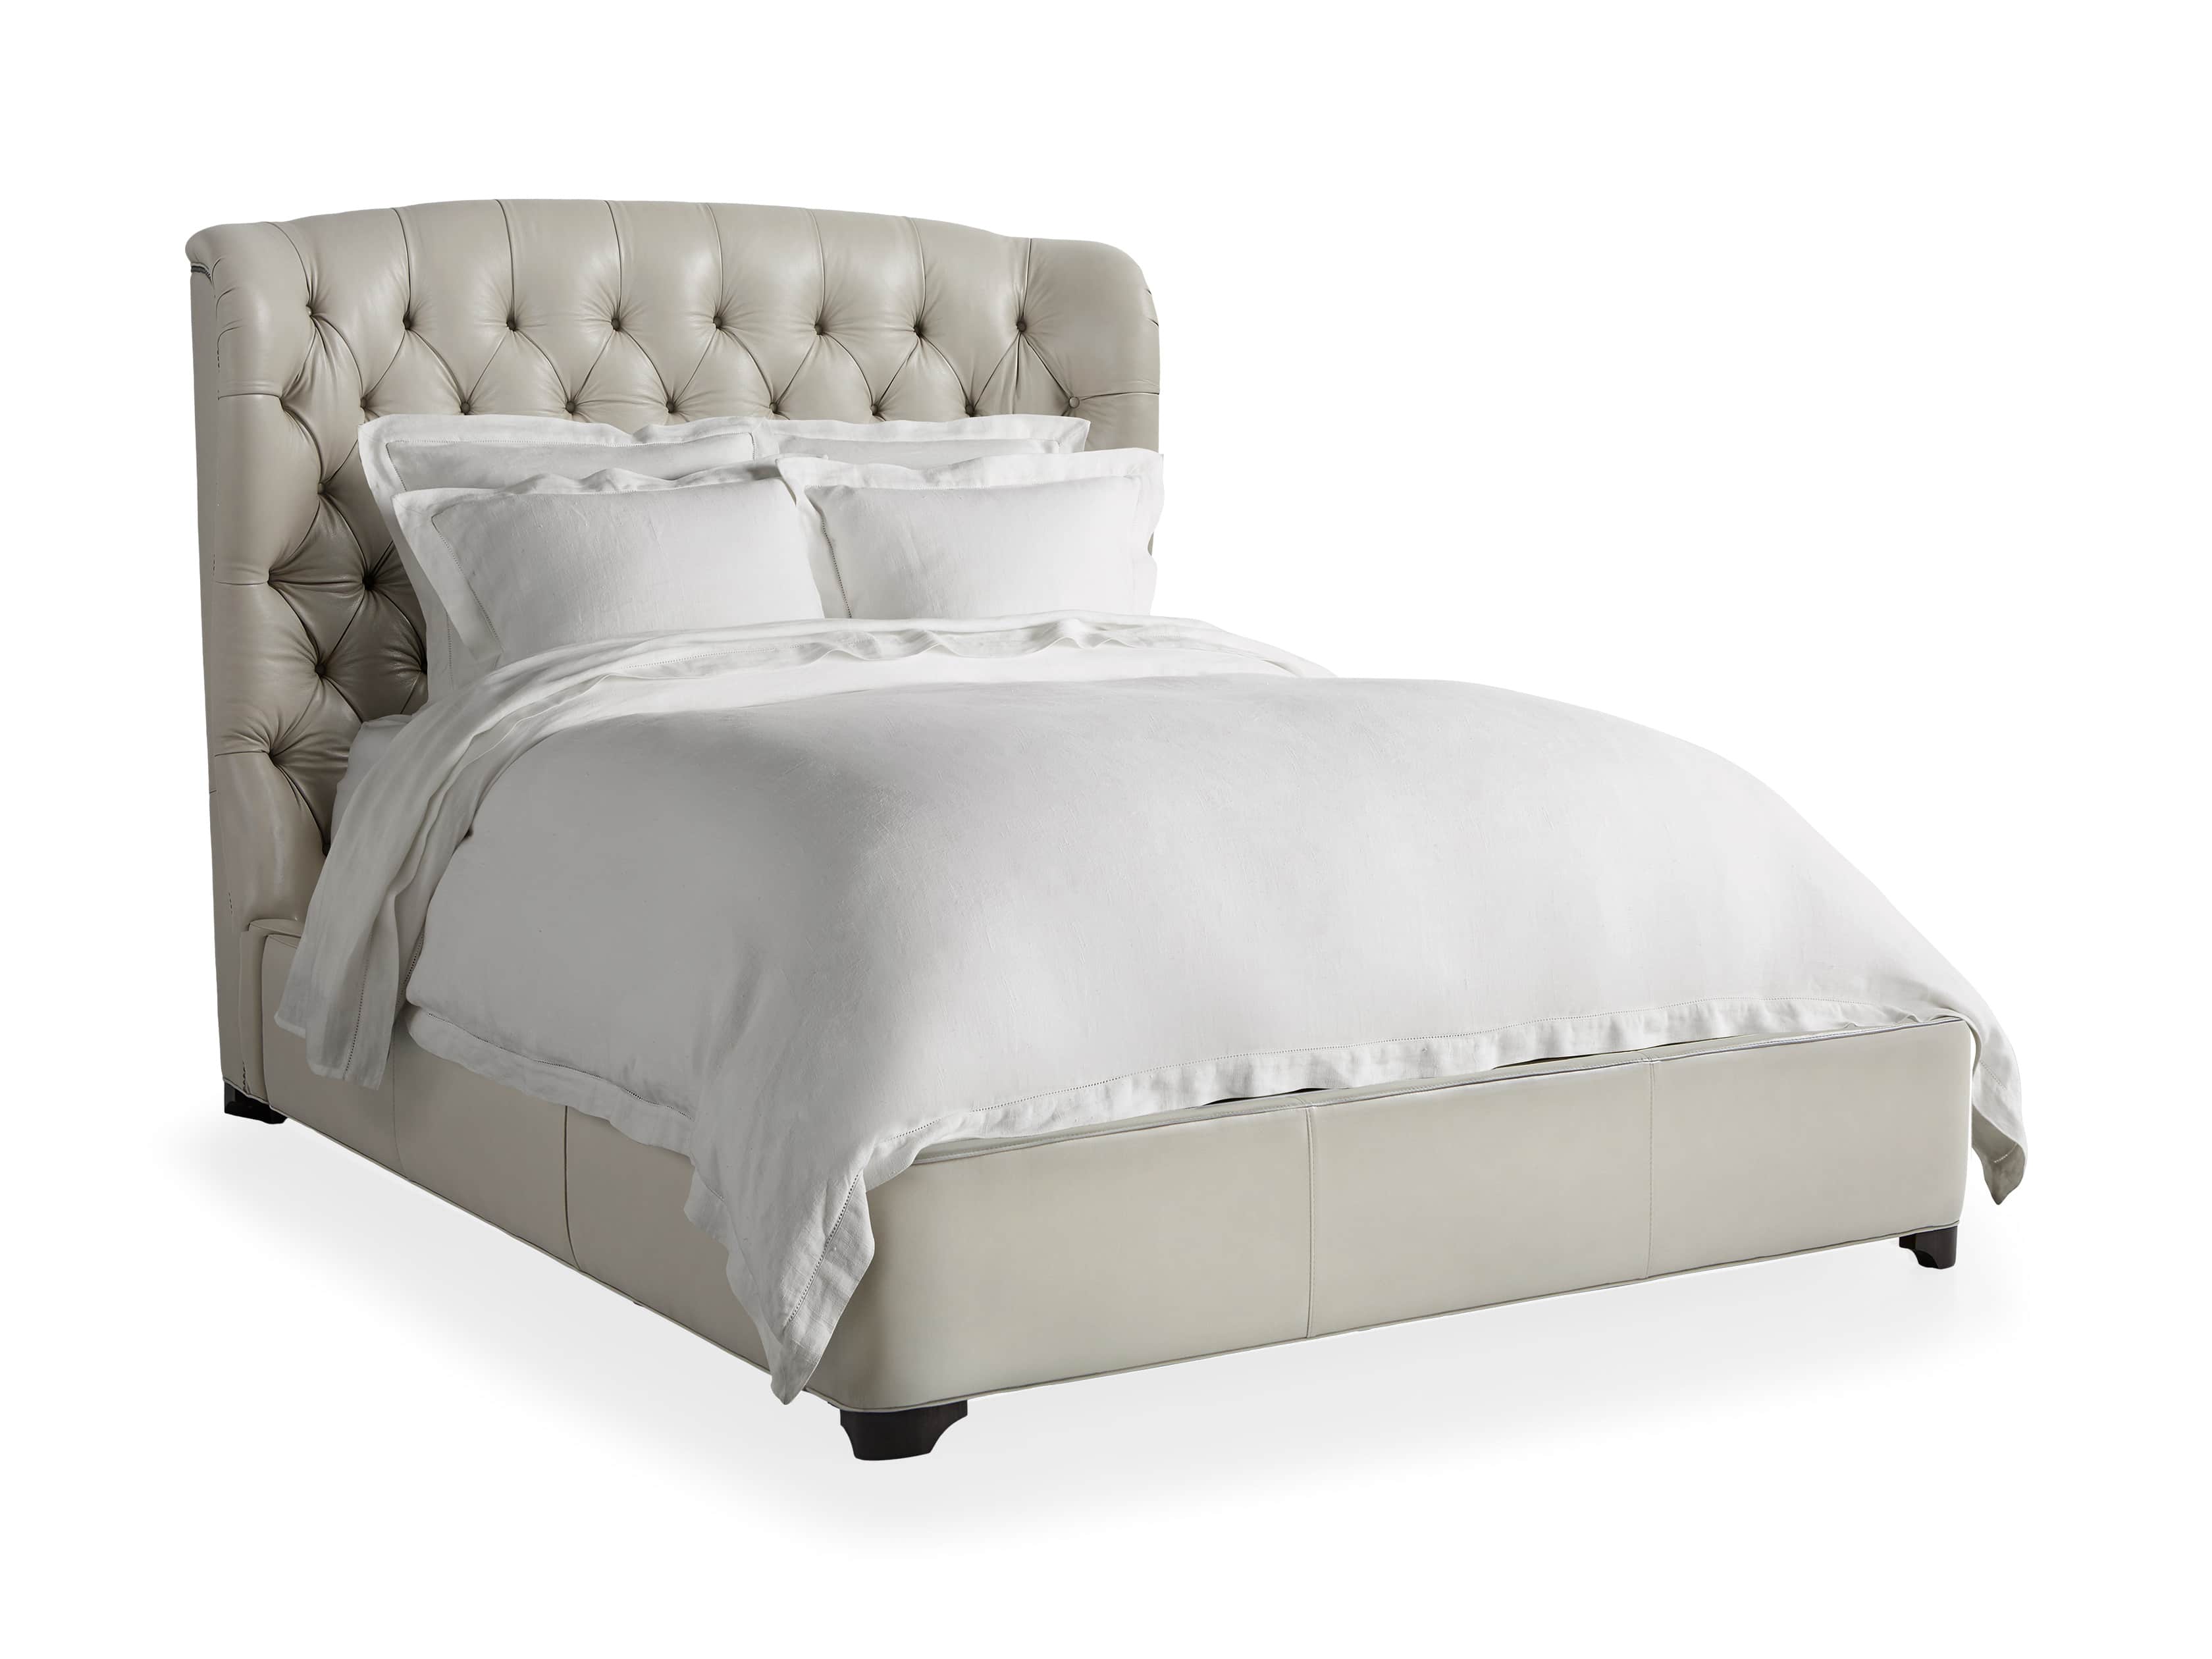 Mariah Leather Tufted Bed Arhaus, White Leather Tufted Bed Frame